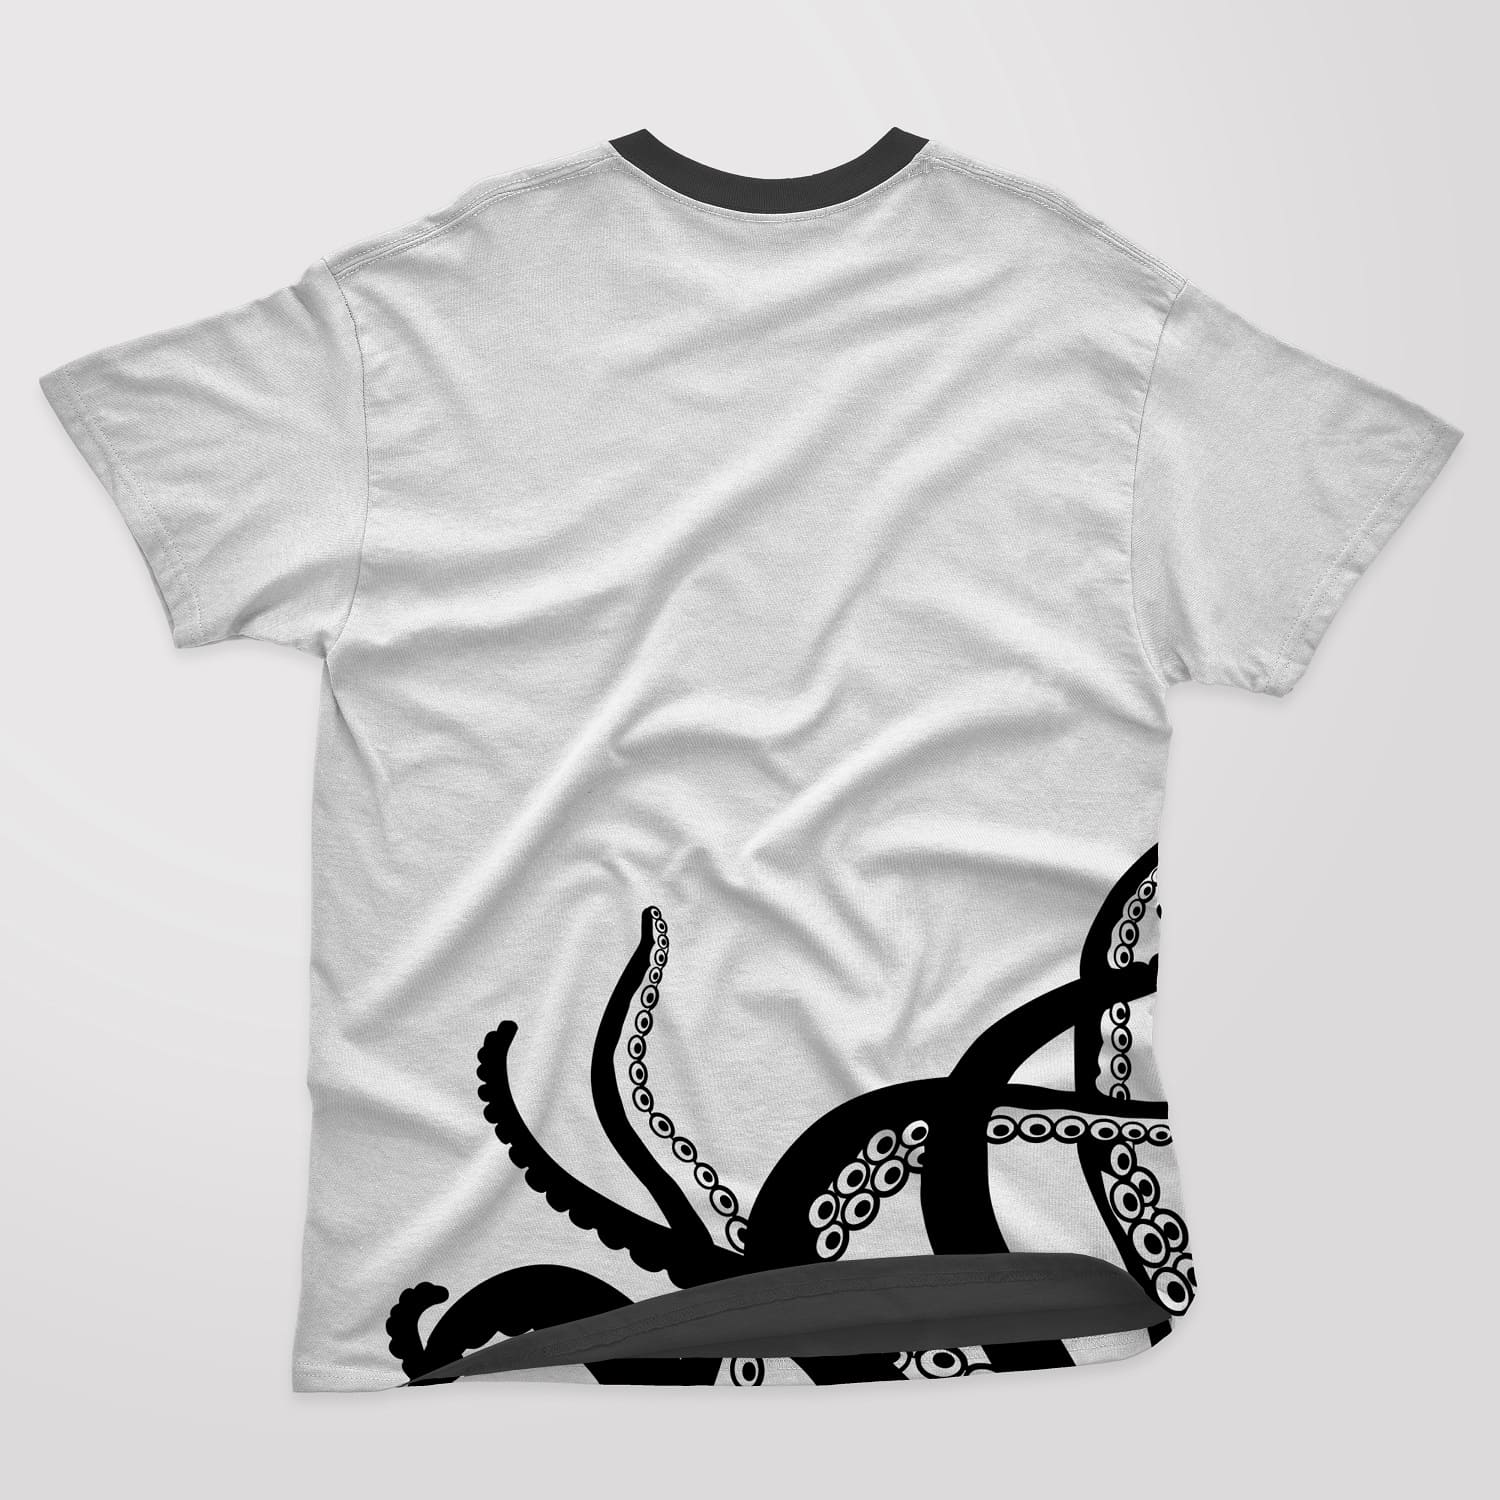 Black and white t-shirt with six octopus tentacles on a white background.